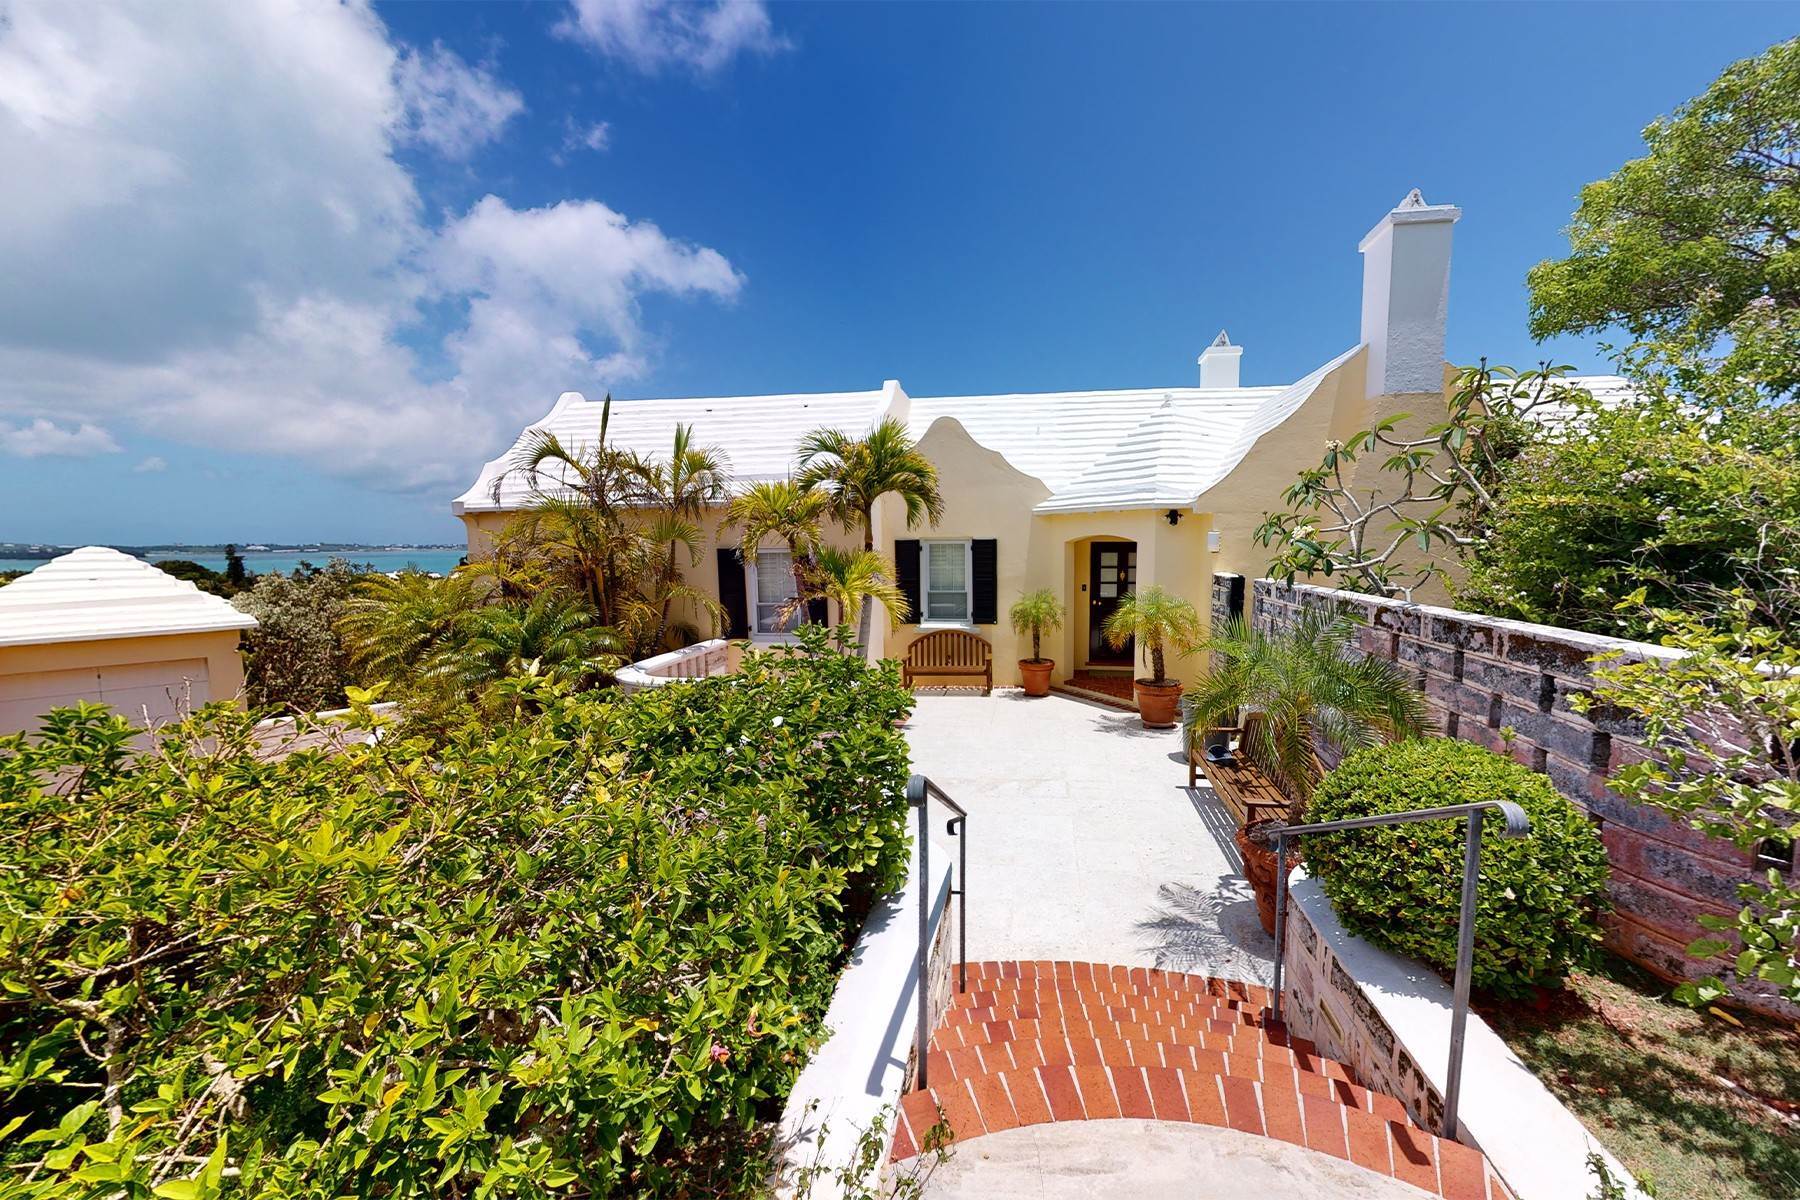 23. House for Sale at Atlanta By The Sea and Jolly Roger 2, Mid Ocean Drive St Georges Parish, HS 02 Bermuda